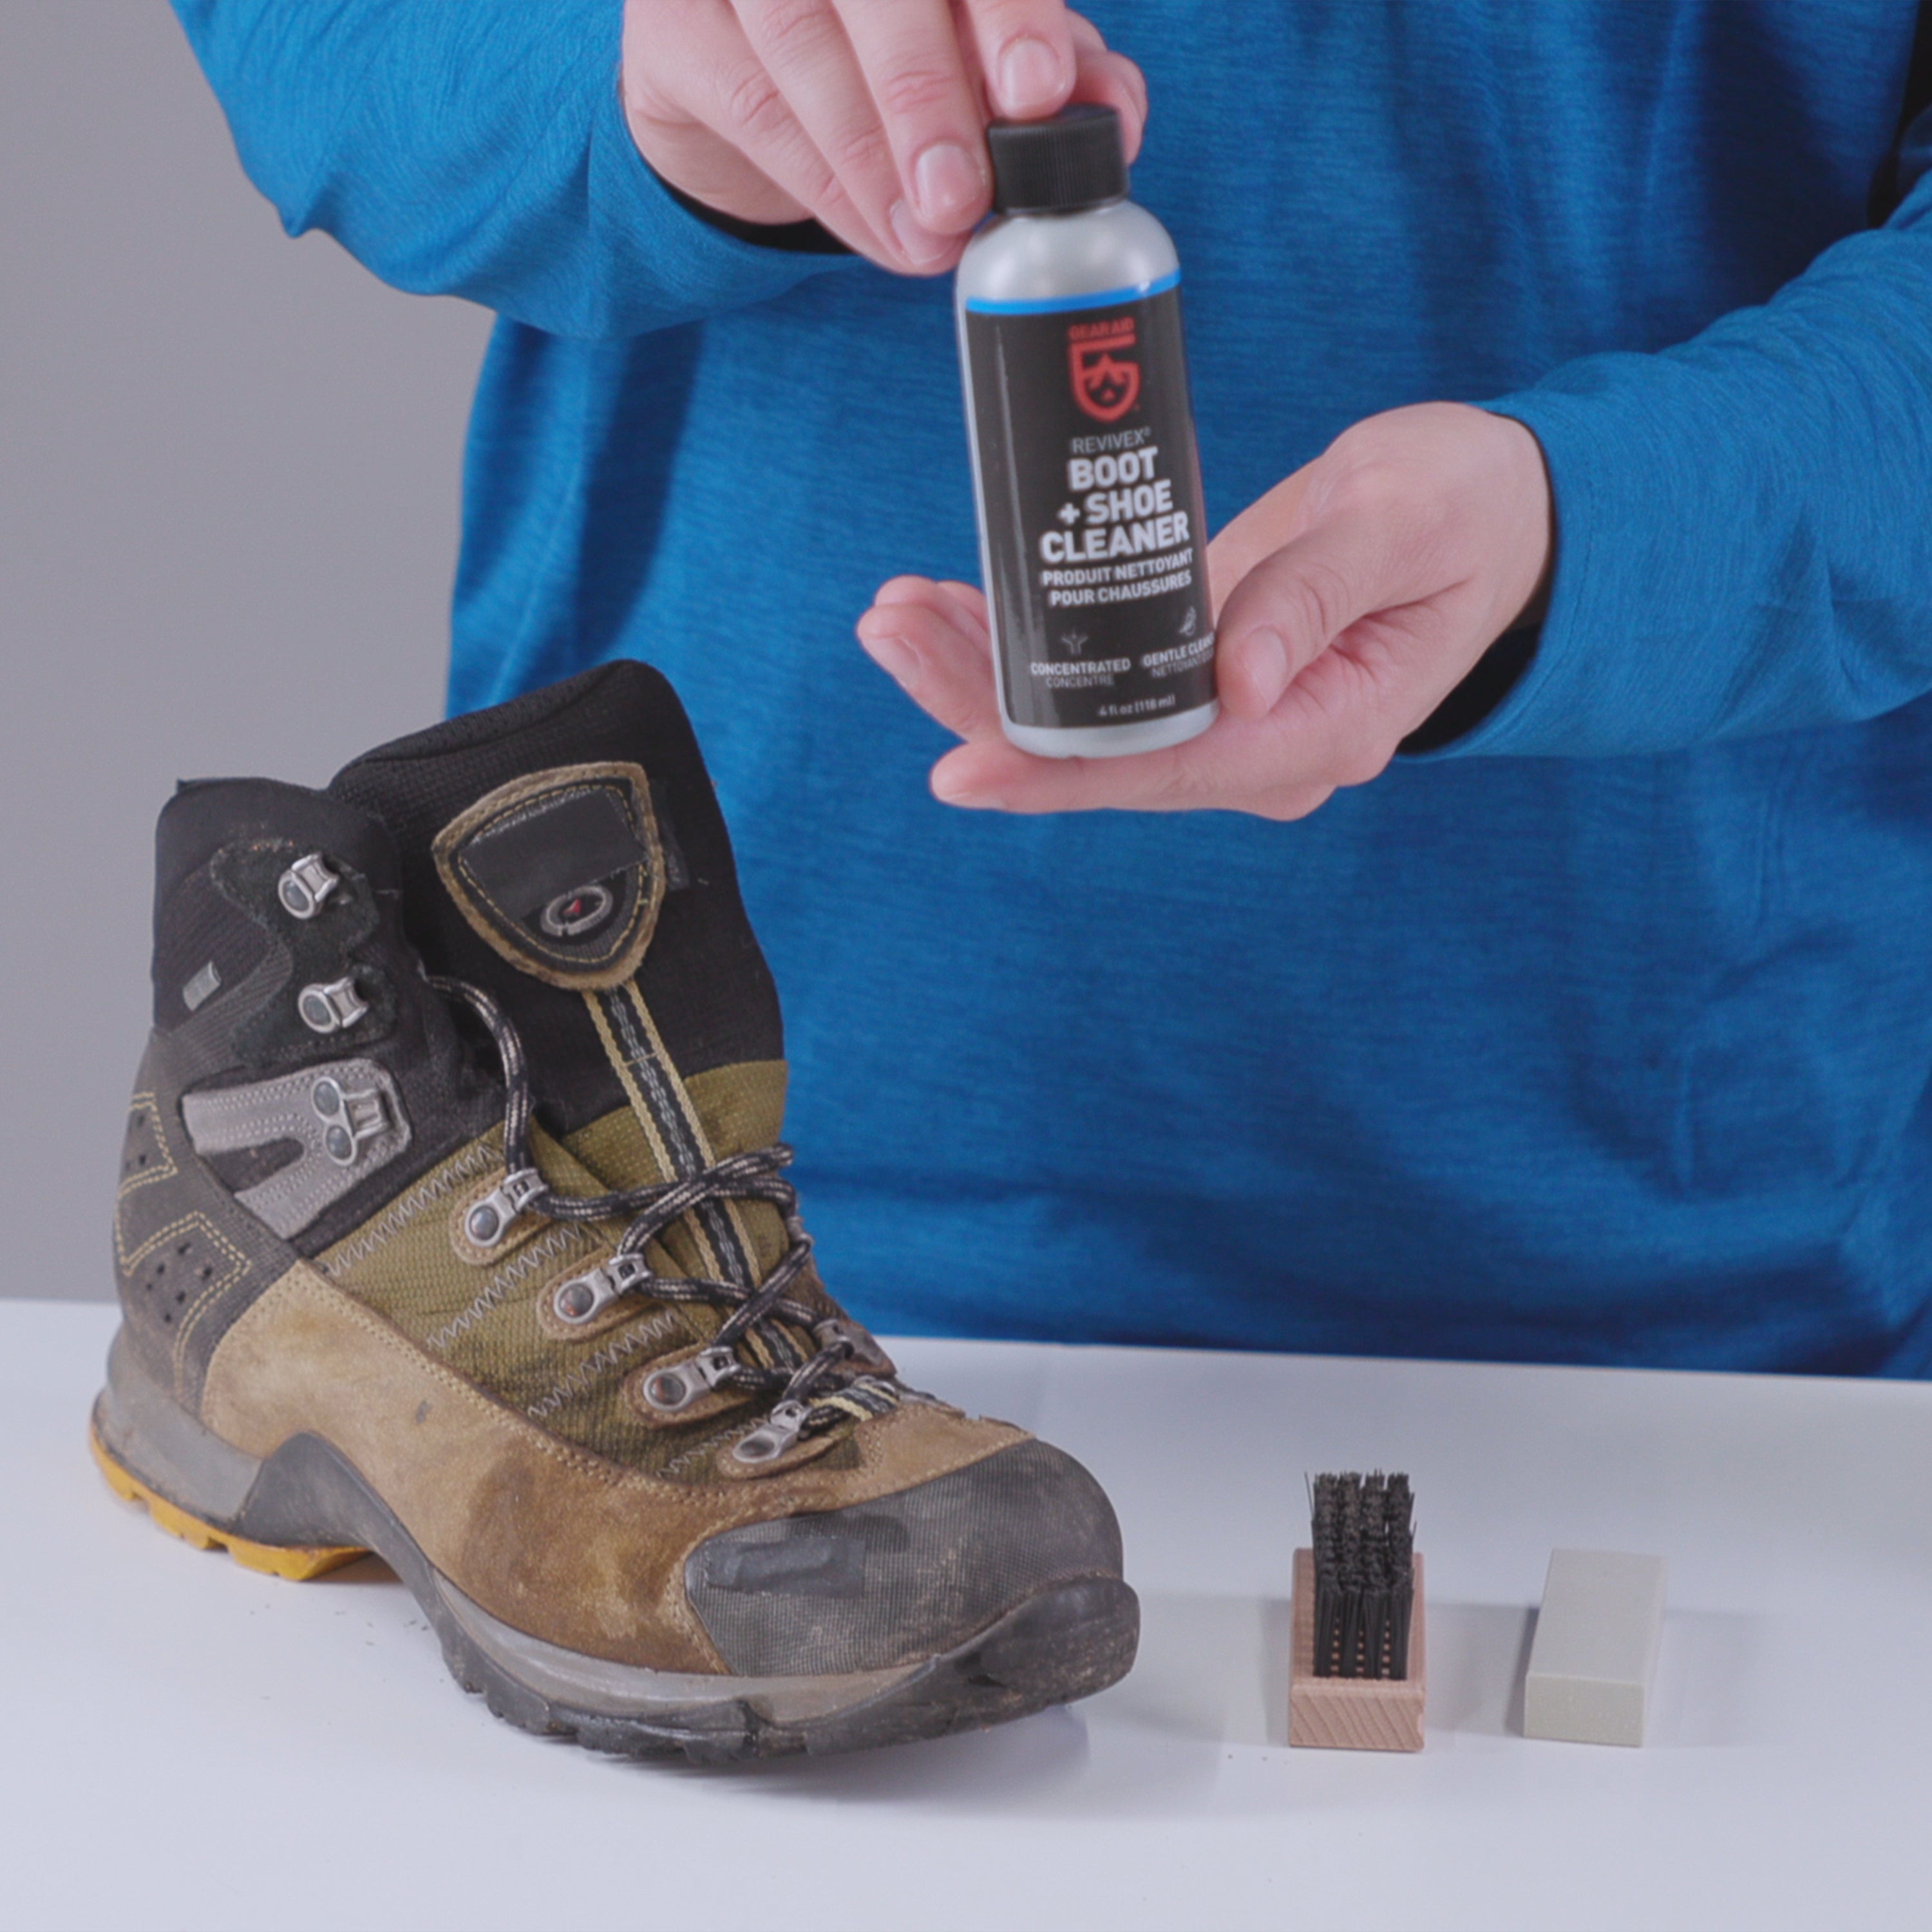 Revivex Suede Boot Care Kit | Gear Aid